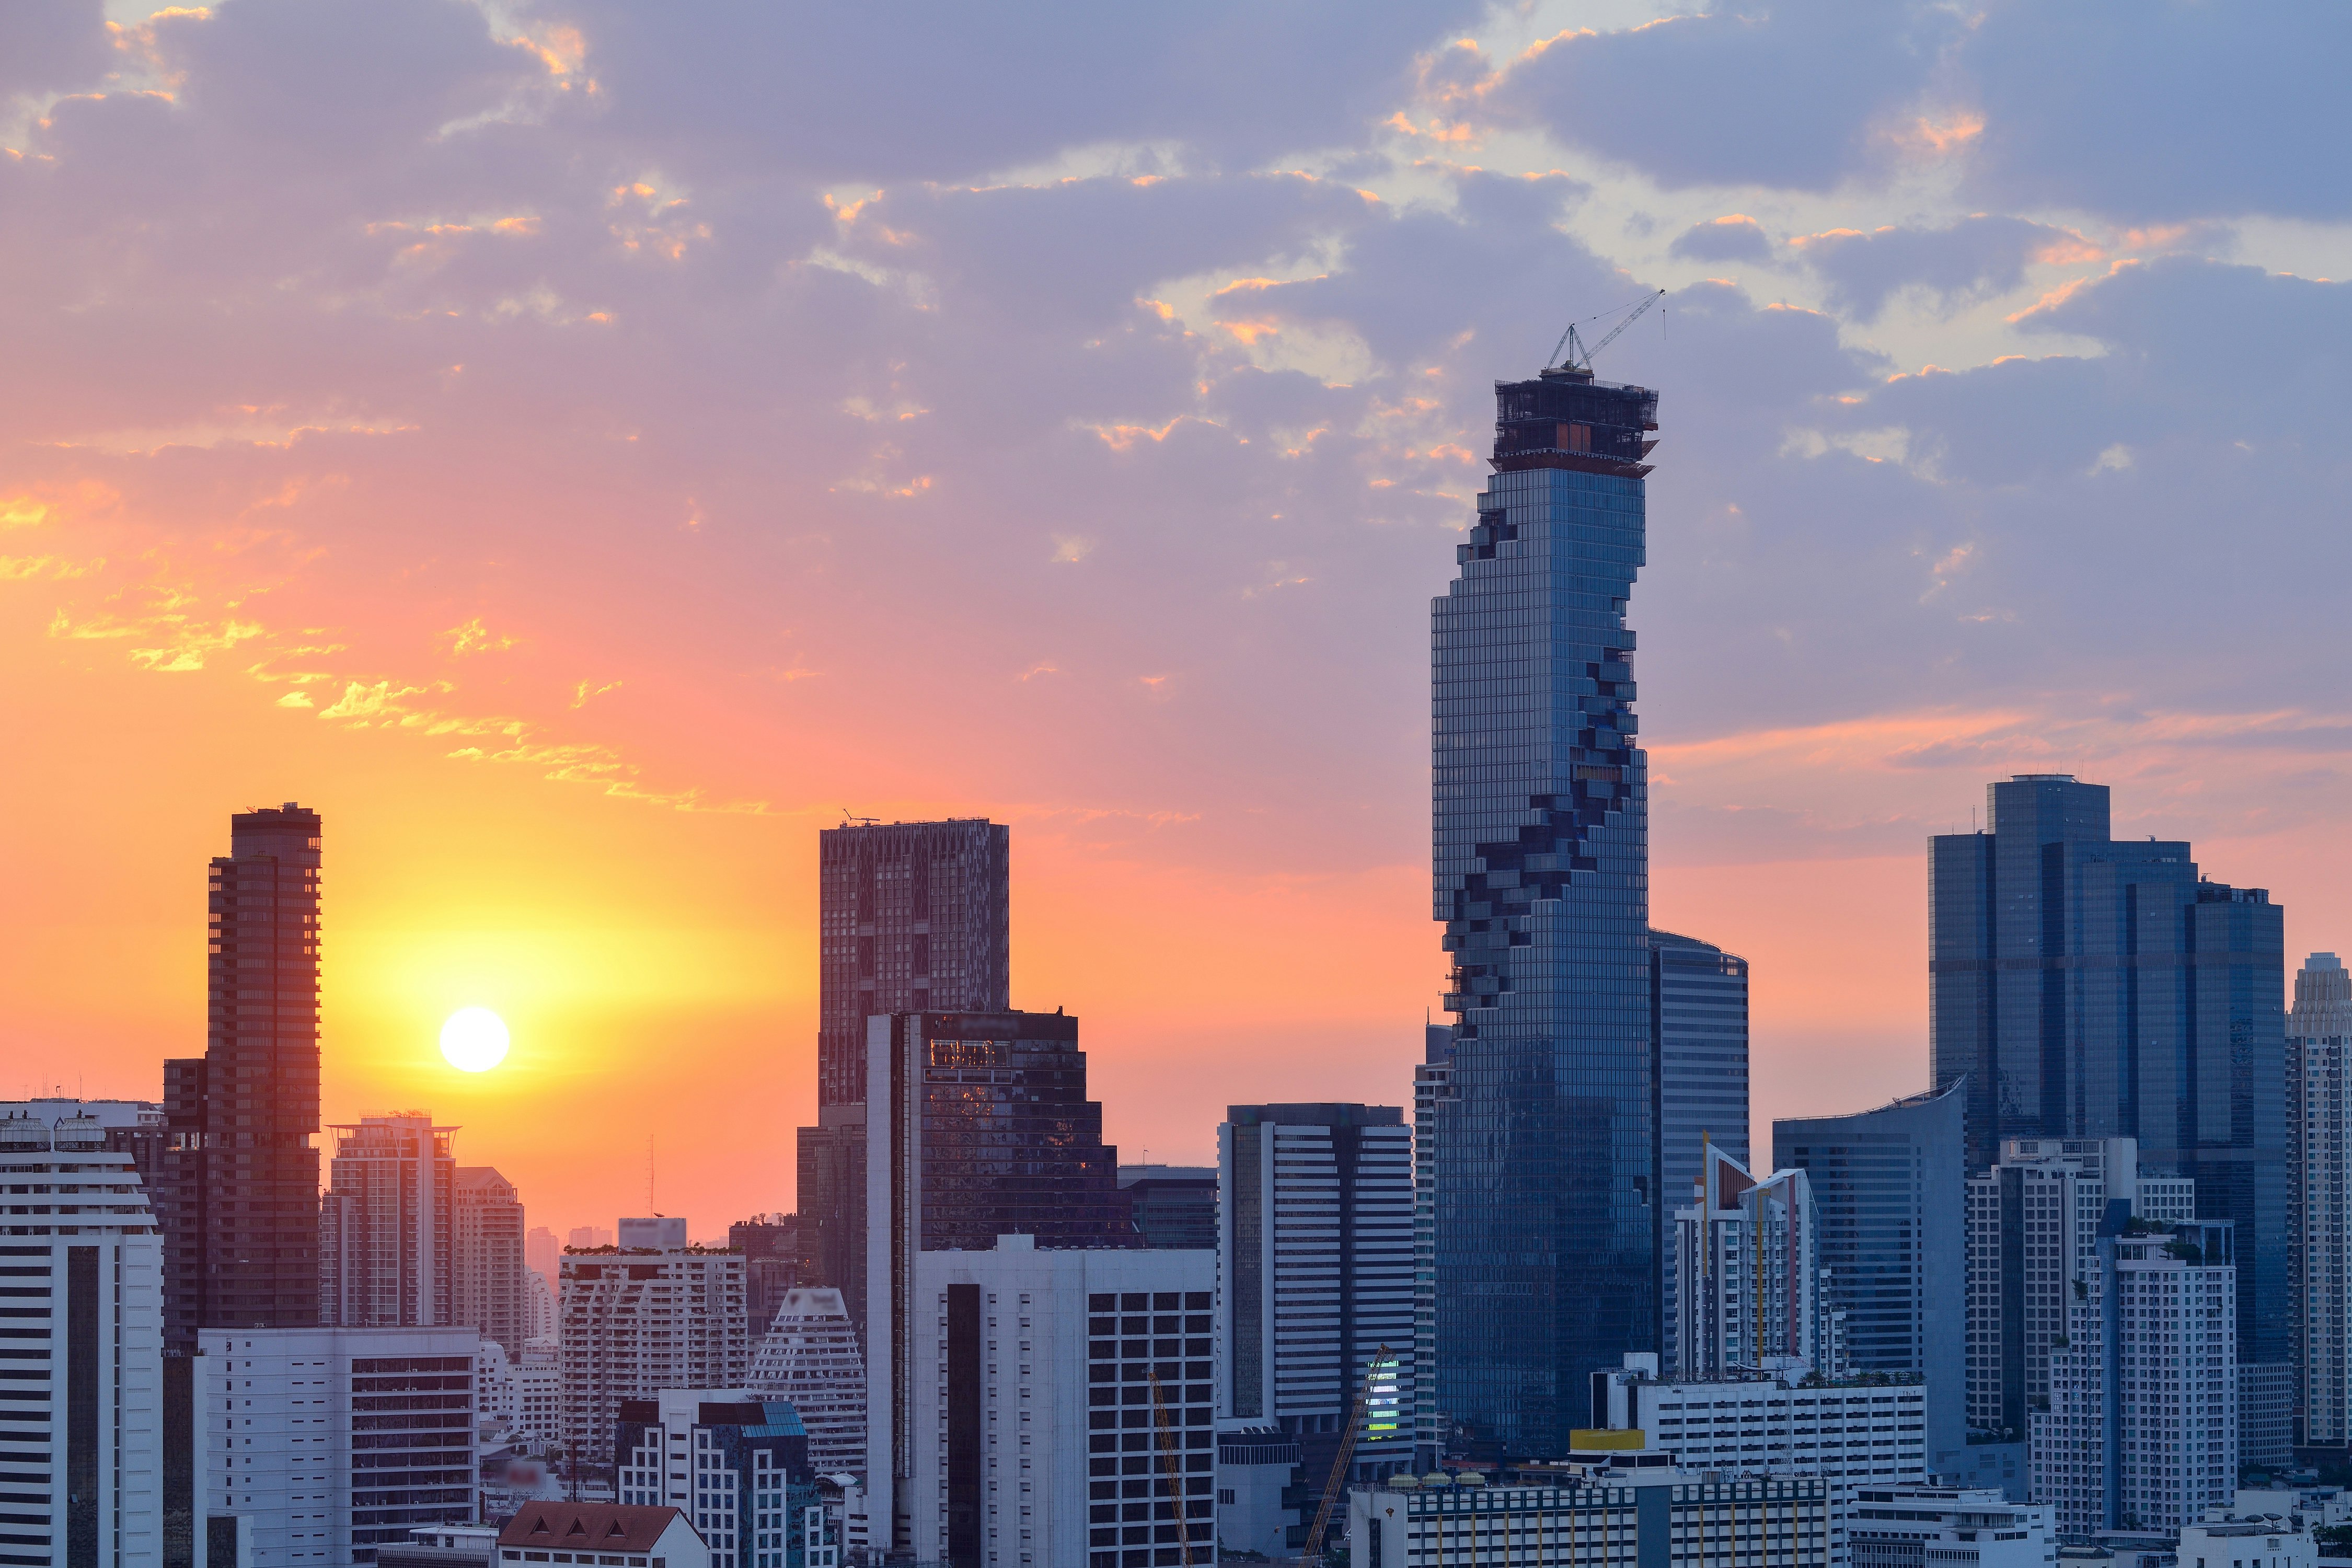 The skyline of Bangkok, Thailand, with the King Power MahaNakhon building in shot. The sun is setting. 